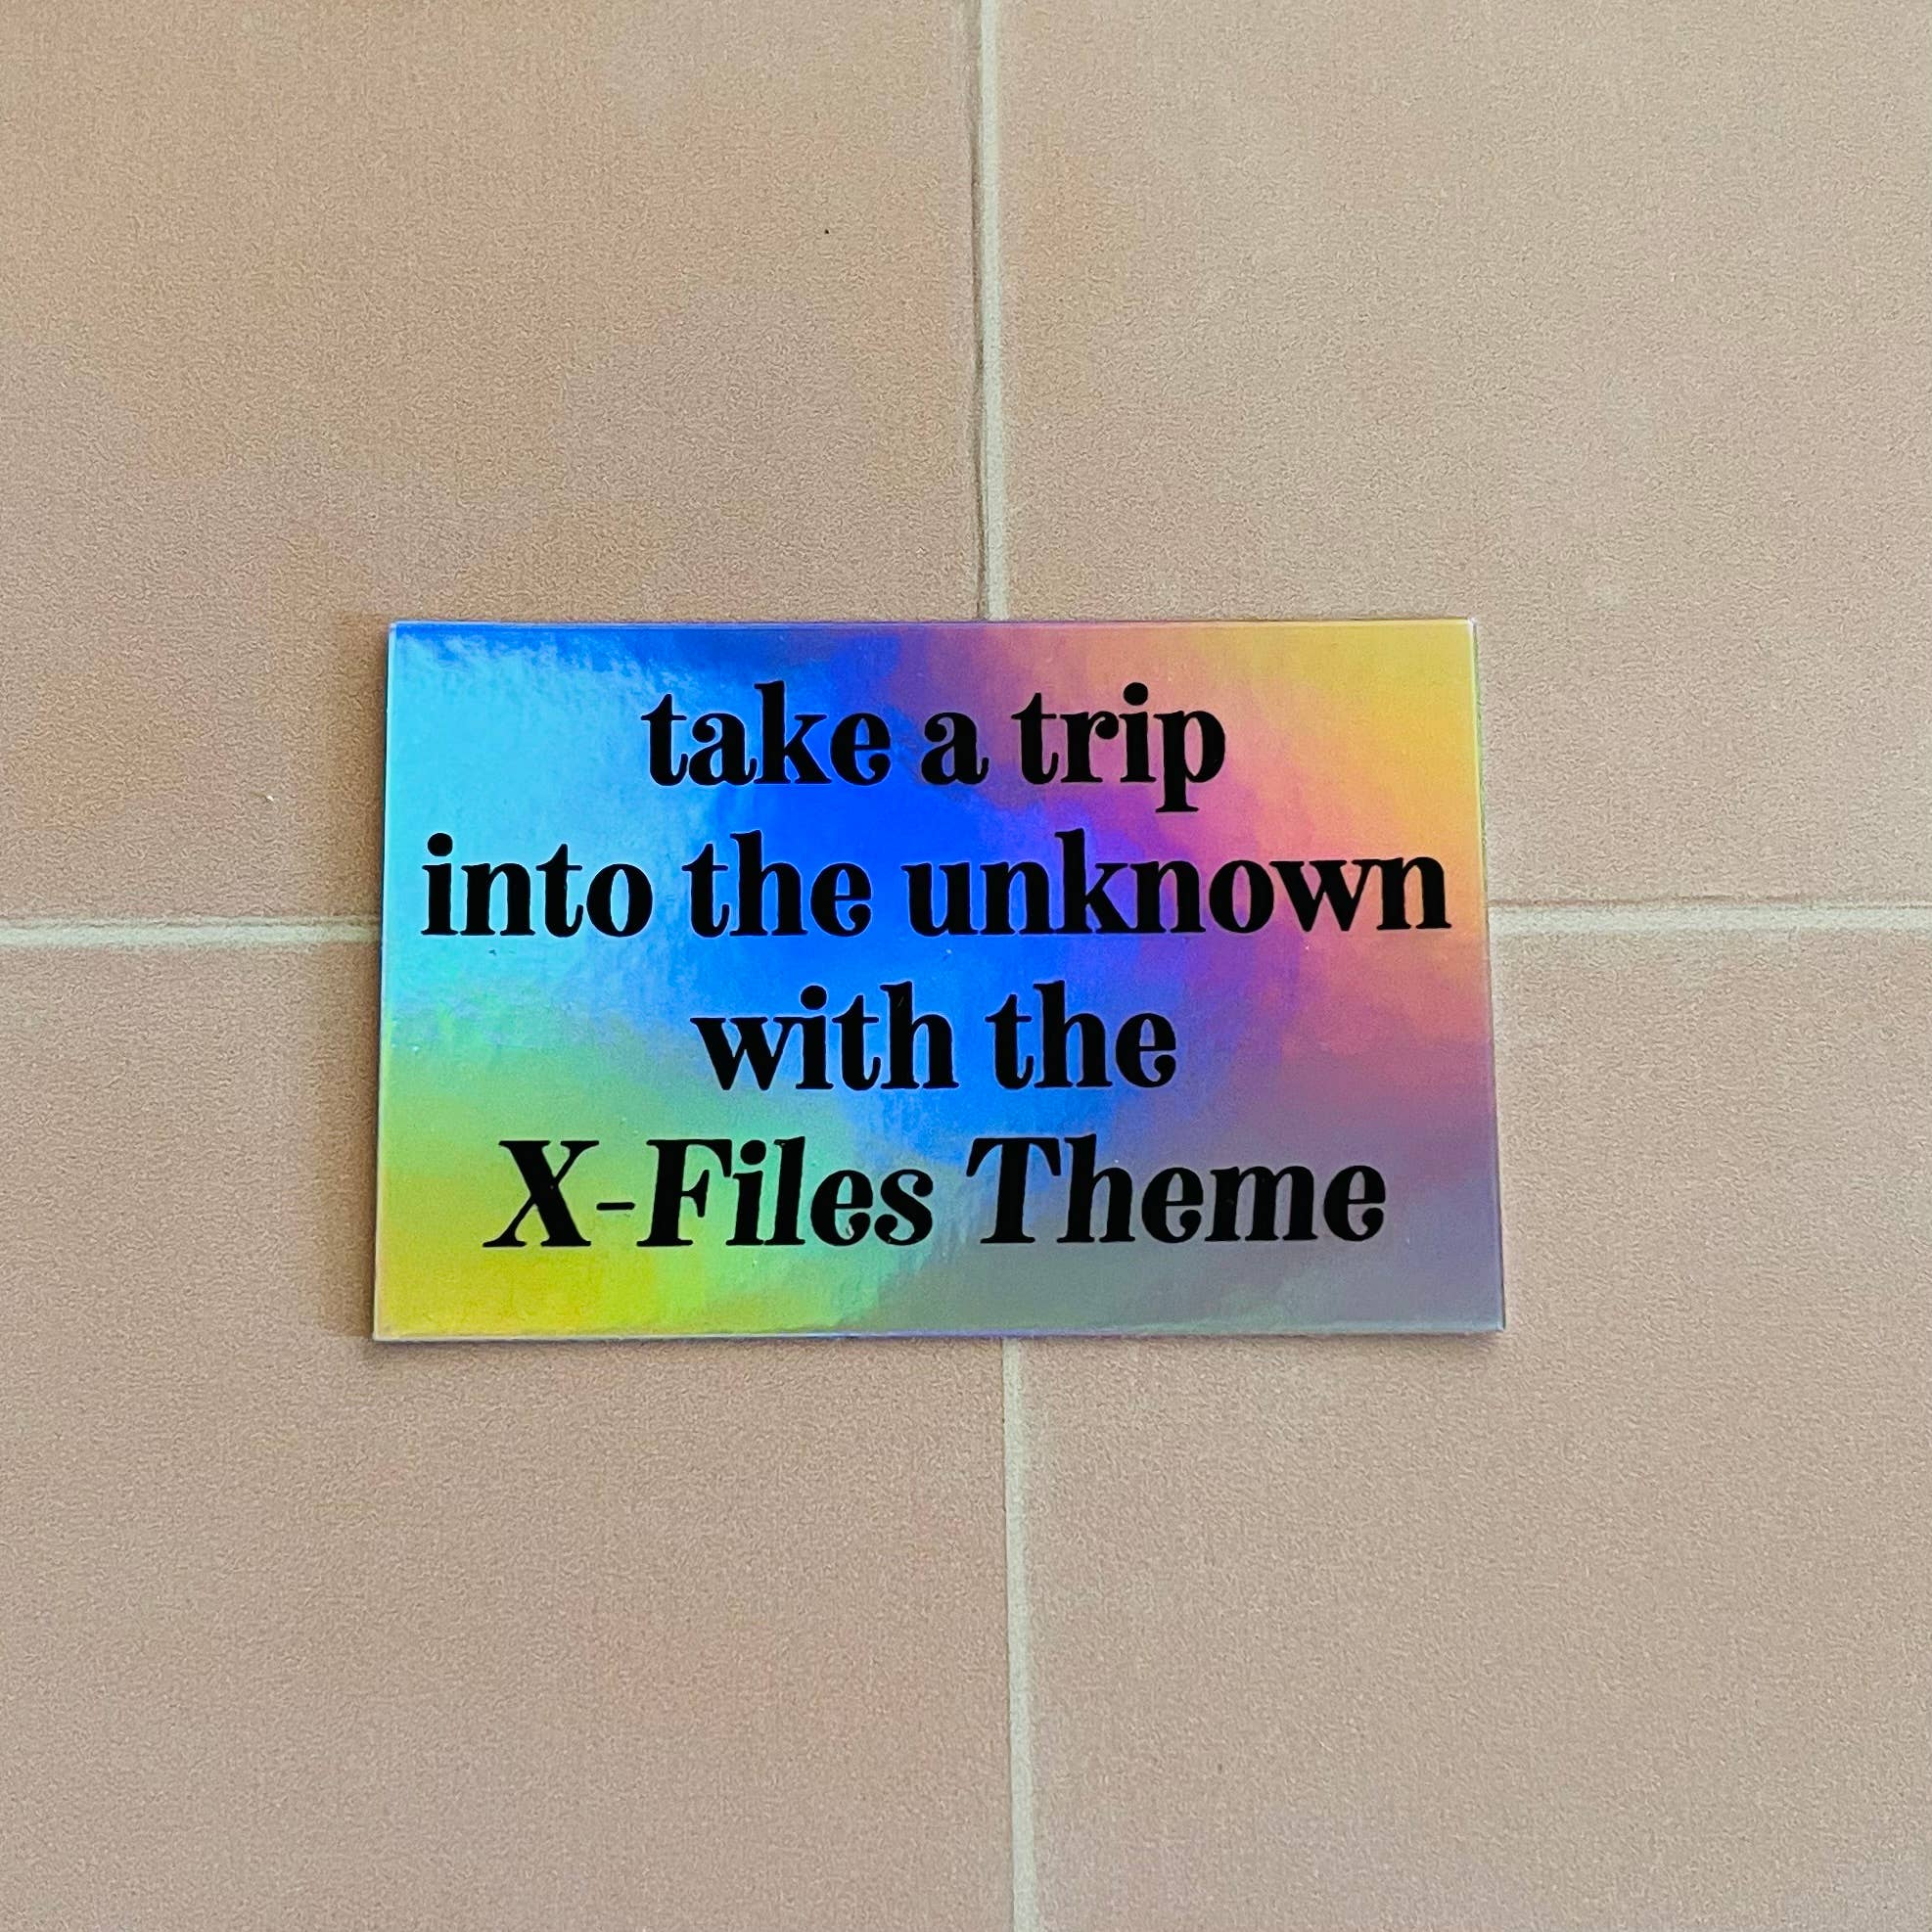 In the unknown with the X-Files Theme Holo sticker